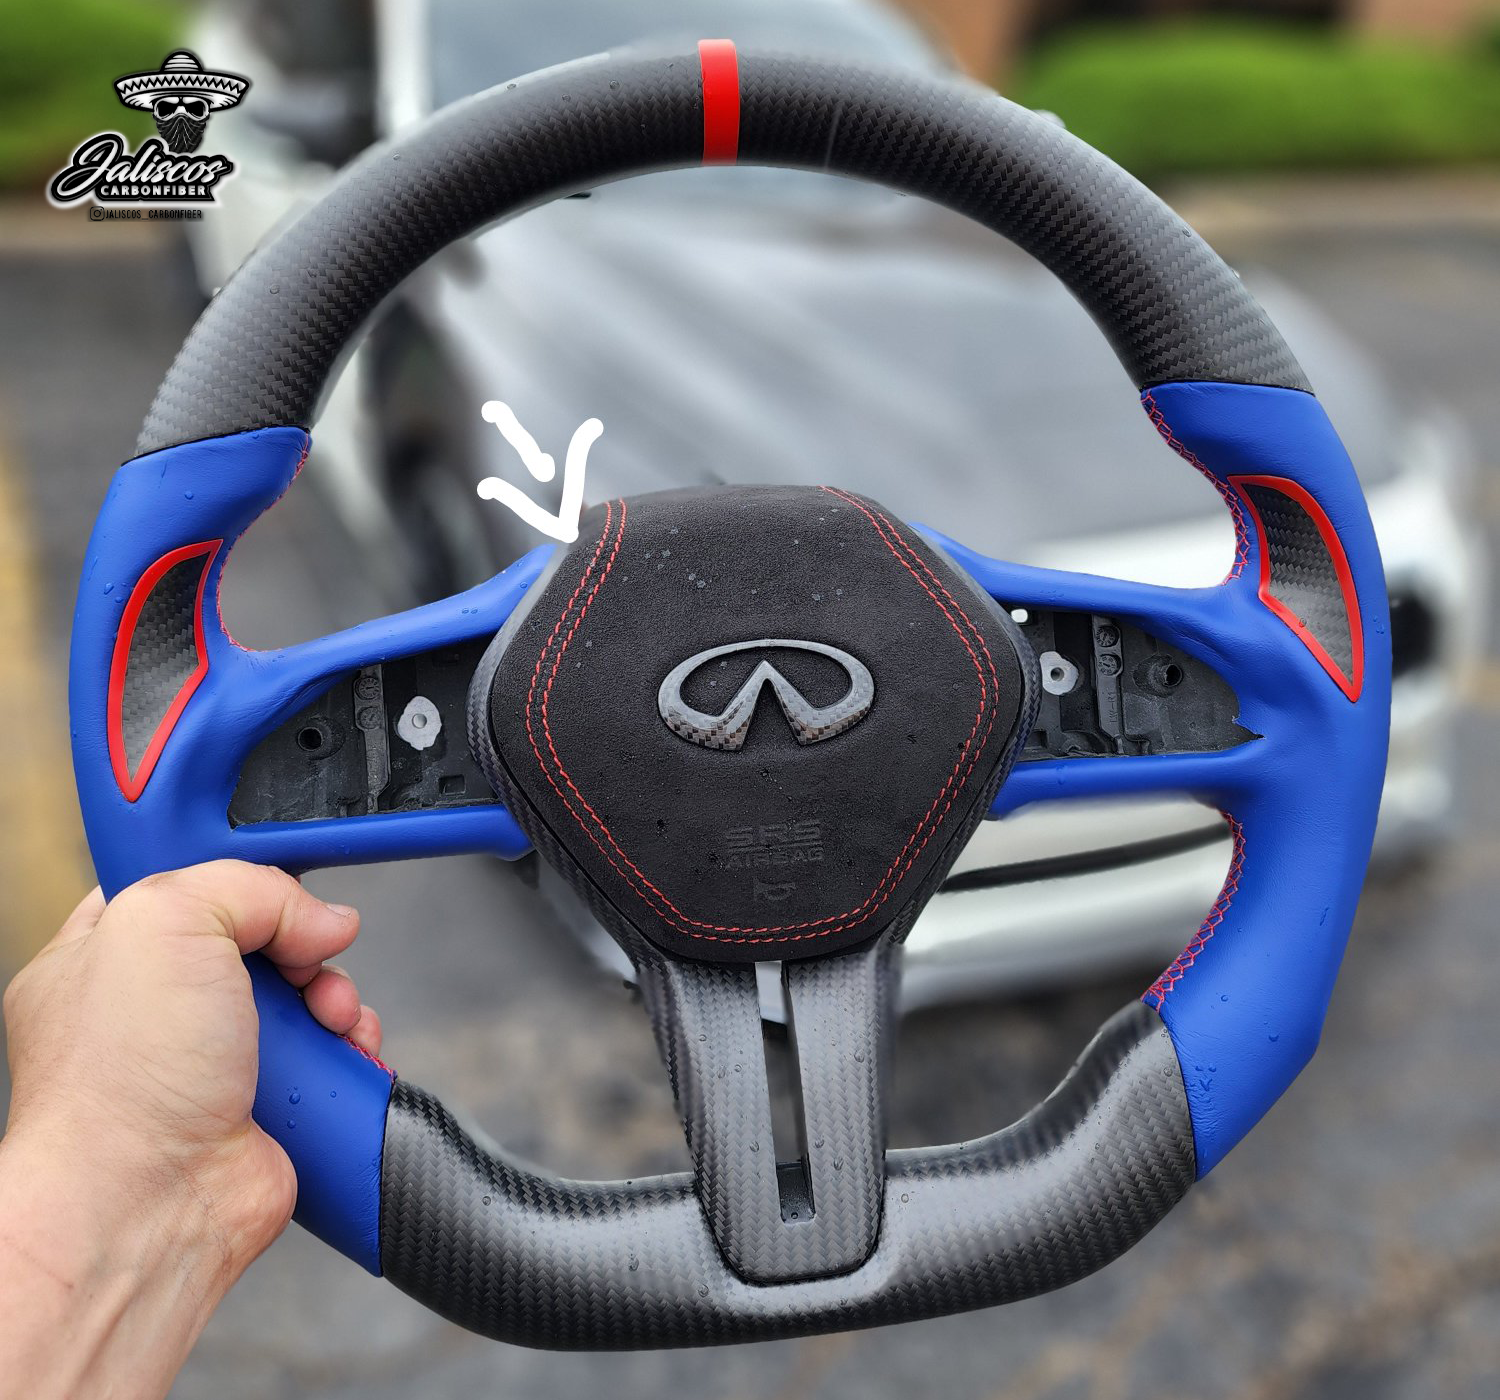 Jalisco's custom cover for Infiniti Q50/Q60 steering wheel airbag: blue grip, black thumb grip with red outlines, red stripes, and a detailed suede-like airbag cover accented with red stitching and a carbon fiber Infiniti logo. Arrow emphasizes the meticulous customization of the airbag cover.